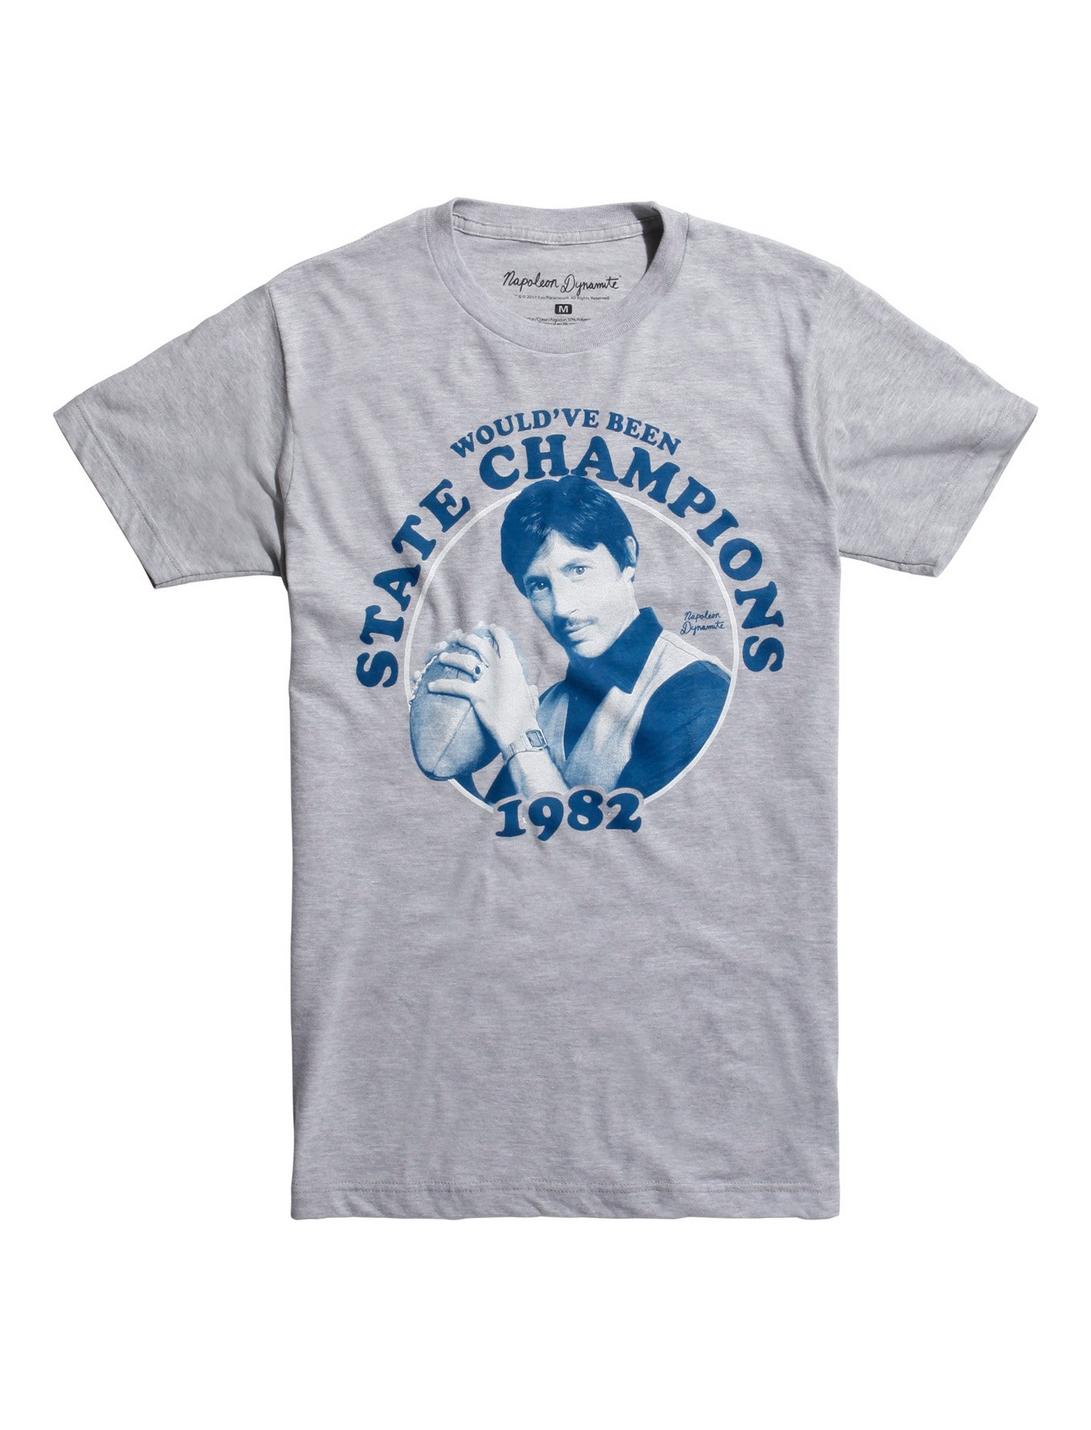 Napoleon Dynamite Uncle Rico State Champions 1982 T-Shirt, GREY, hi-res